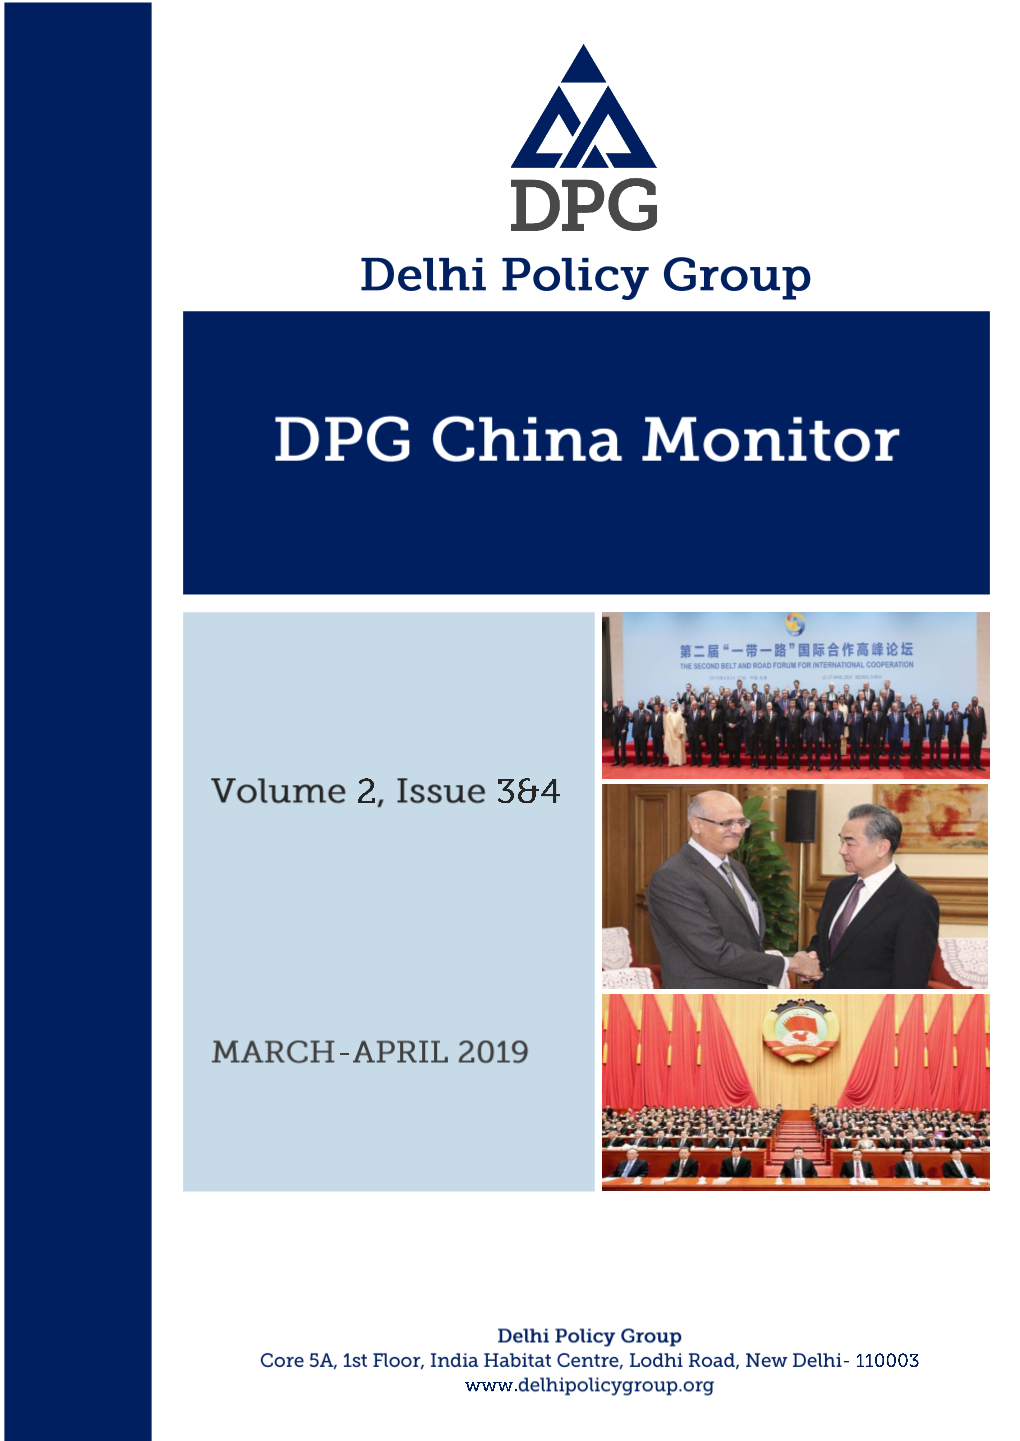 Founded in 1994, the Delhi Policy Group Is Among India's Oldest